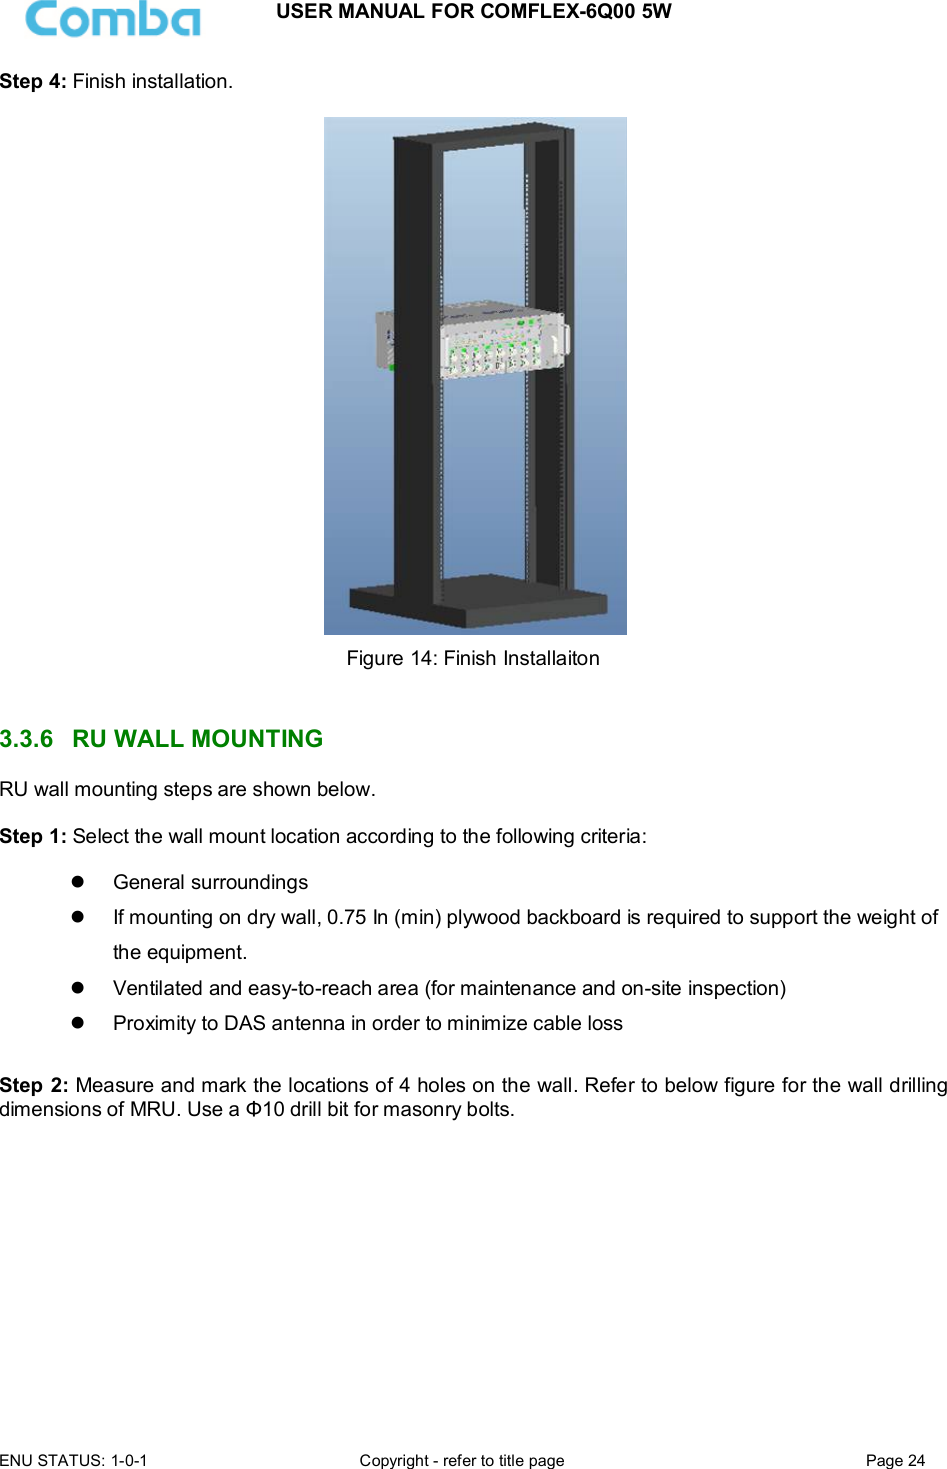 USER MANUAL FOR COMFLEX-6Q00 5W ENU STATUS: 1-0-1  Copyright - refer to title page  Page 24  Step 4: Finish installation.   Figure 14: Finish Installaiton   3.3.6  RU WALL MOUNTING RU wall mounting steps are shown below.  Step 1: Select the wall mount location according to the following criteria:    General surroundings   If mounting on dry wall, 0.75 In (min) plywood backboard is required to support the weight of the equipment.   Ventilated and easy-to-reach area (for maintenance and on-site inspection)   Proximity to DAS antenna in order to minimize cable loss  Step 2: Measure and mark the locations of 4 holes on the wall. Refer to below figure for the wall drilling dimensions of MRU. Use a Φ10 drill bit for masonry bolts.           